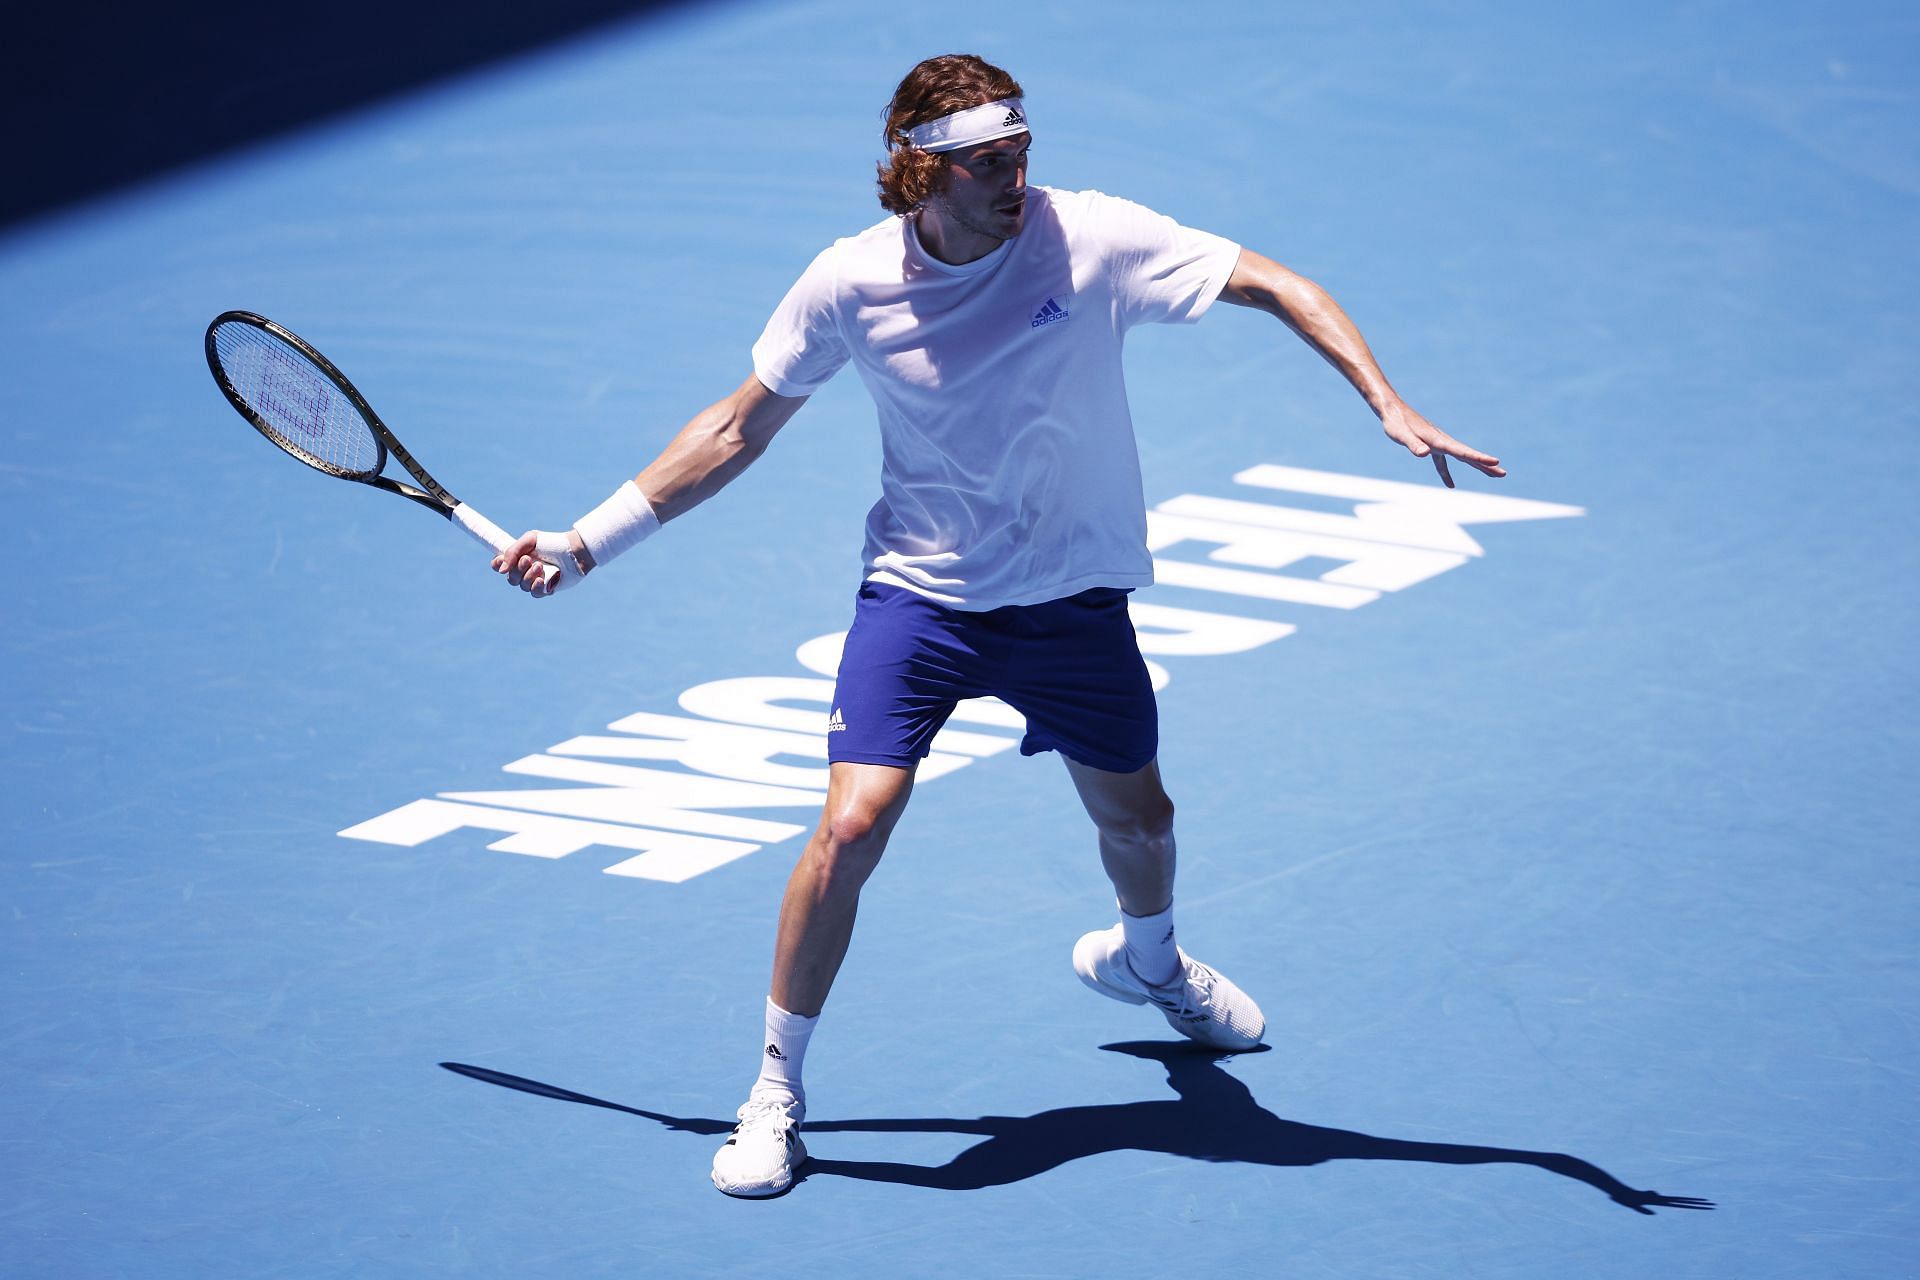 Tsitsipas will be expected to have a long run in the tournament